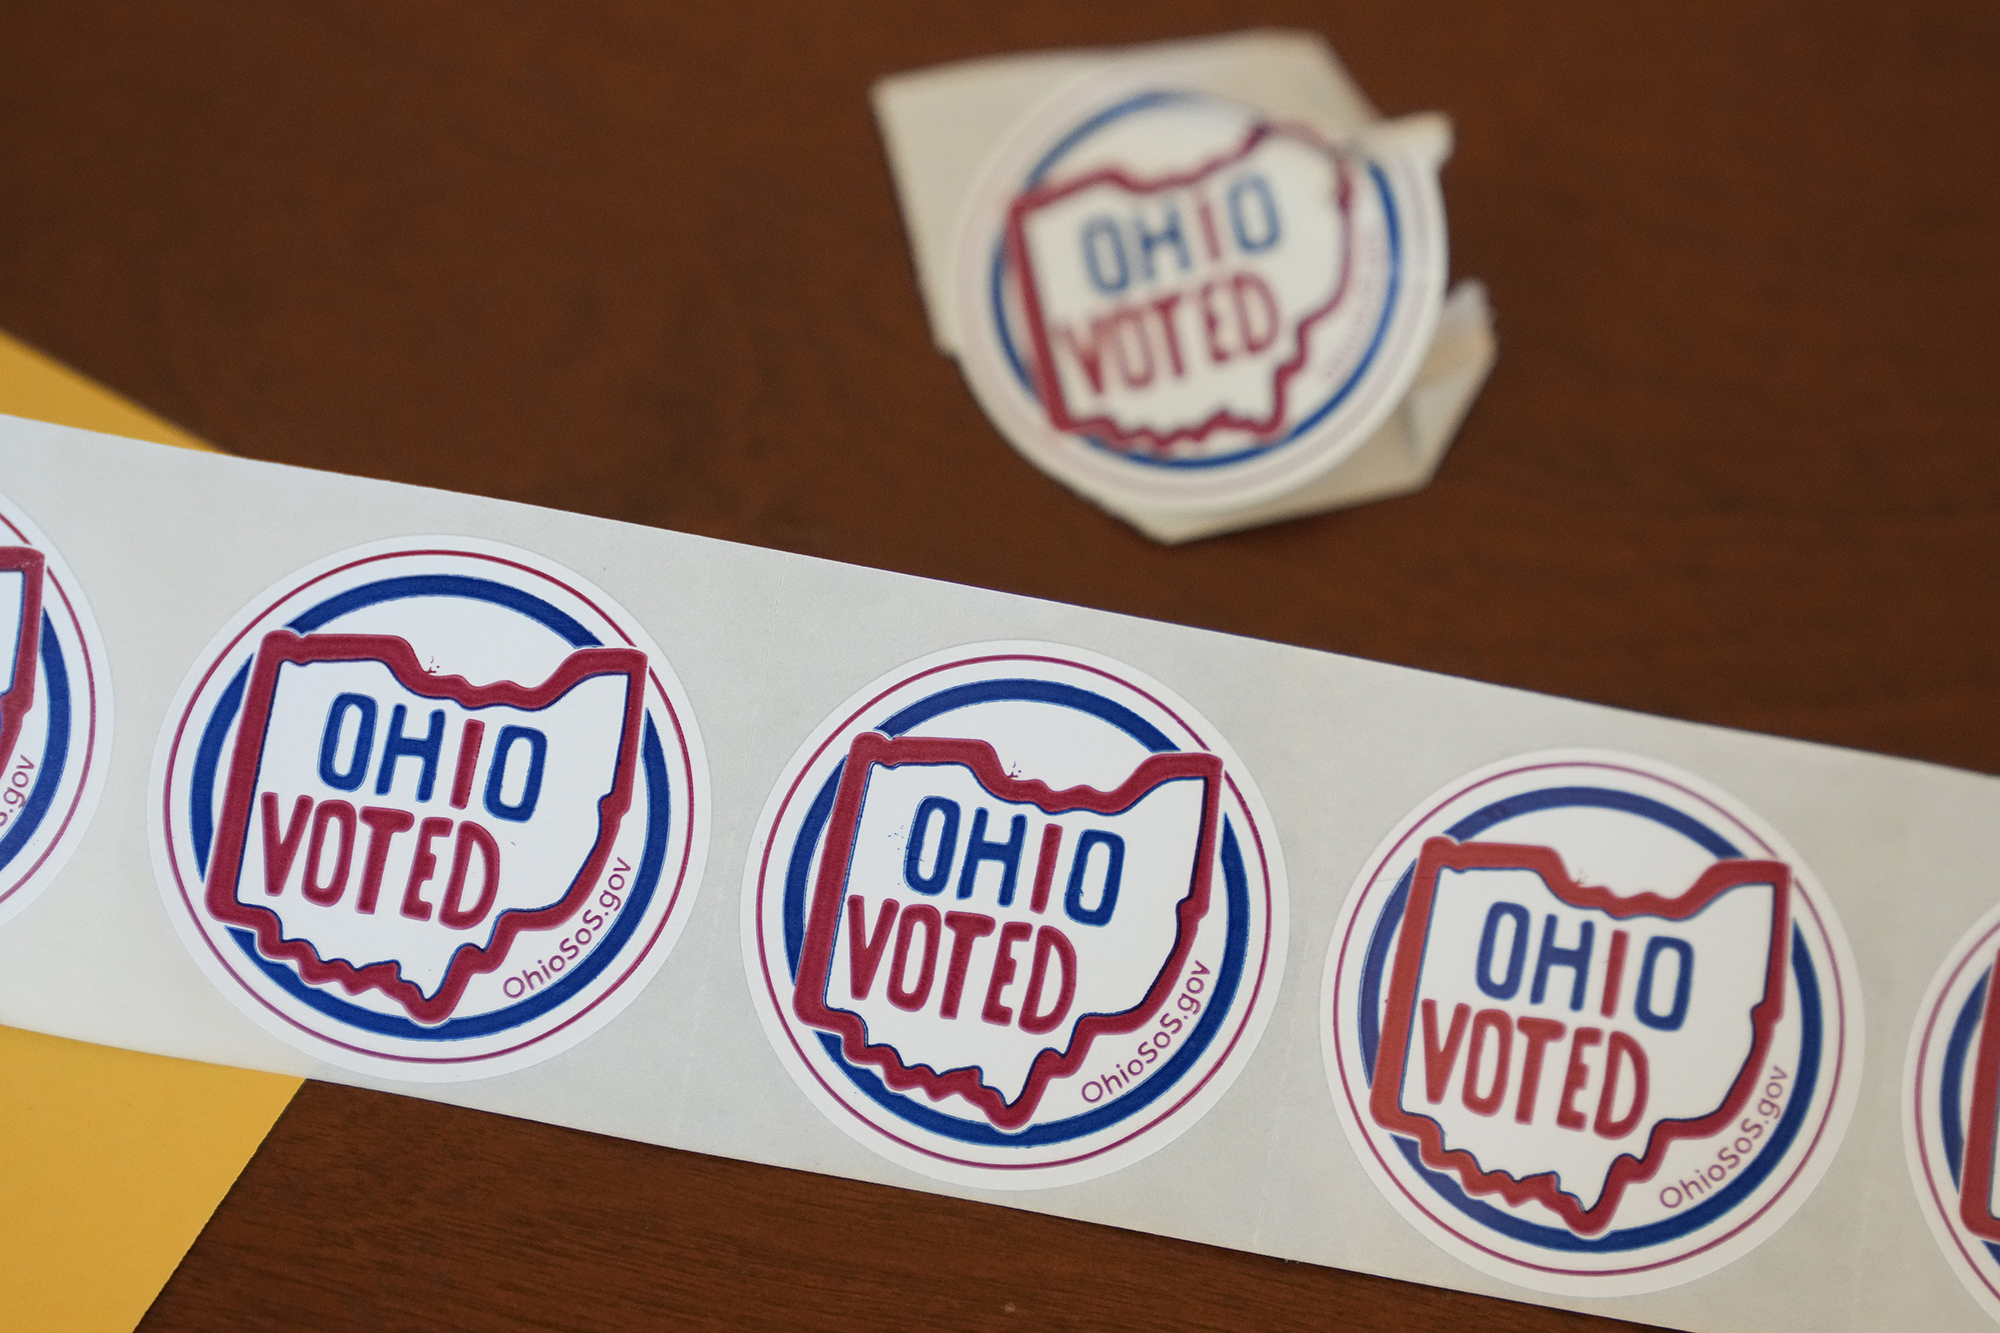 "Ohio Voted" stickers await voters after they cast their ballots at the Meadowbook Golf Club in Clayton, Ohio Tuesday.